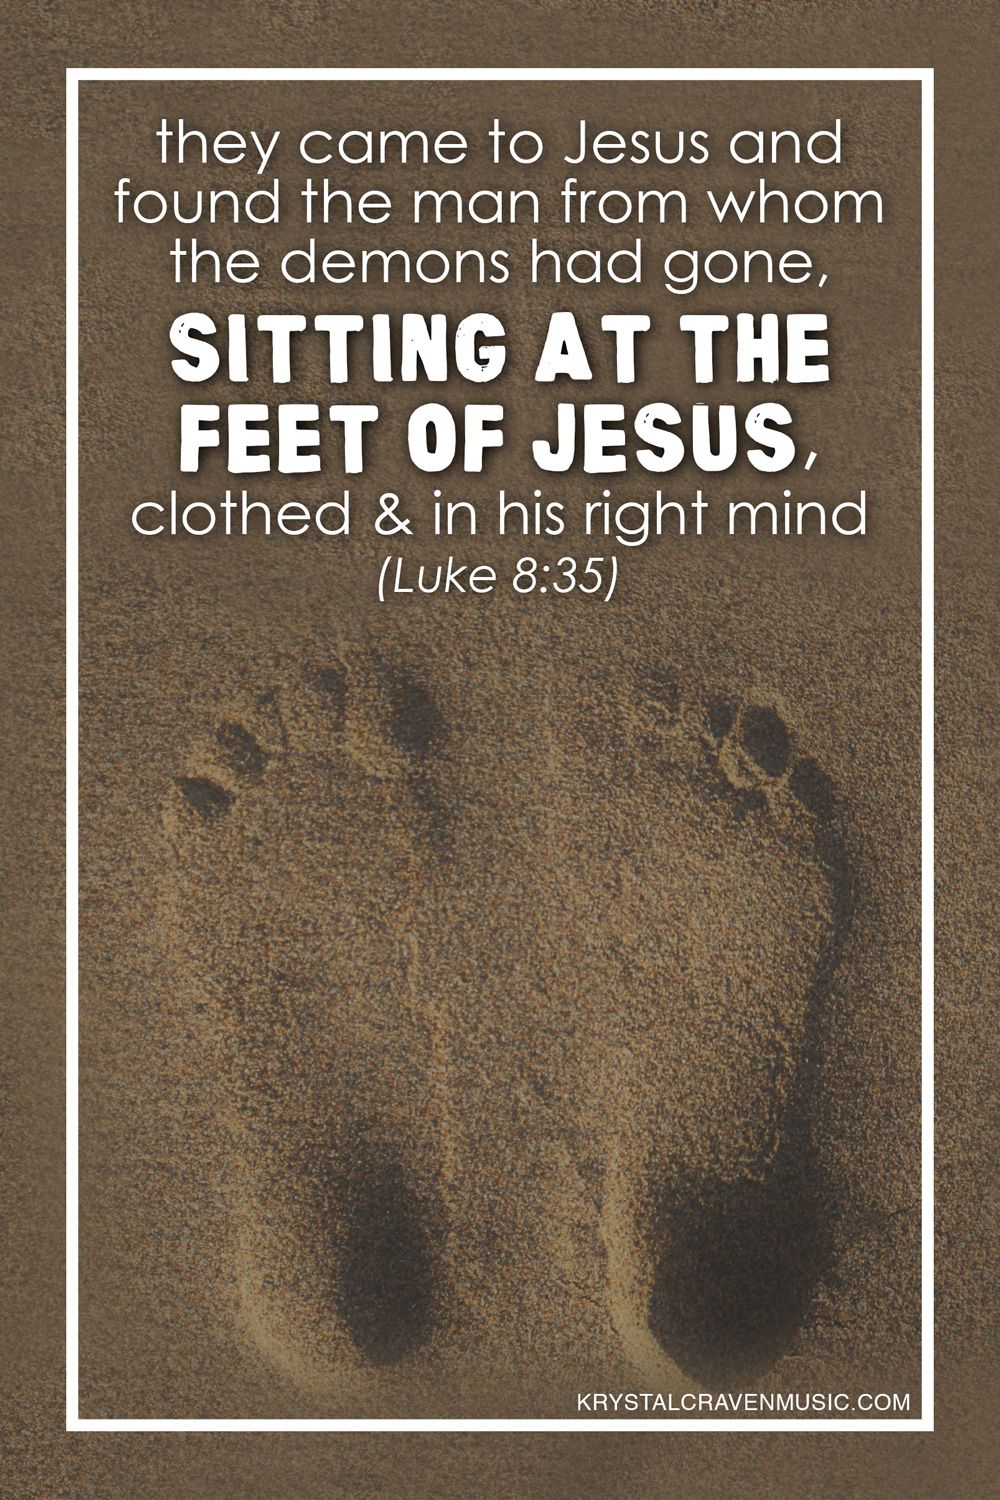 The bible verse text of "they came to Jesus and found the man from whom the demons had gone, sitting at the feet of Jesus, clothed and in his right mind" overlaying feet prints in sand.